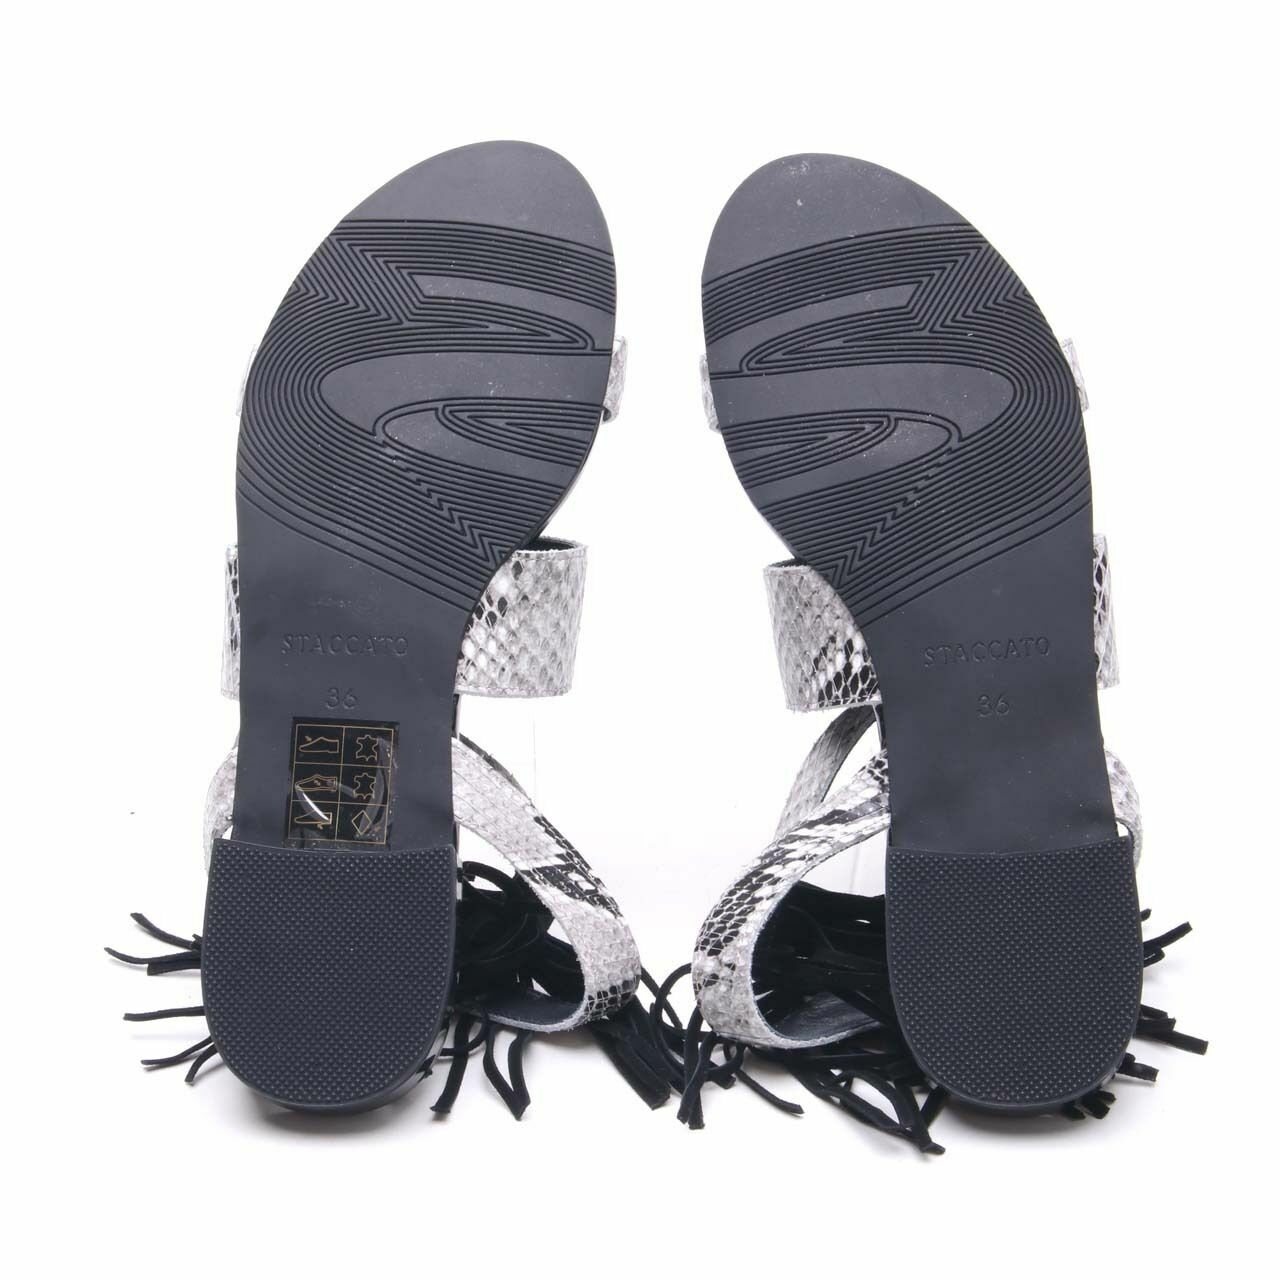 Staccato Black & Grey Sandals